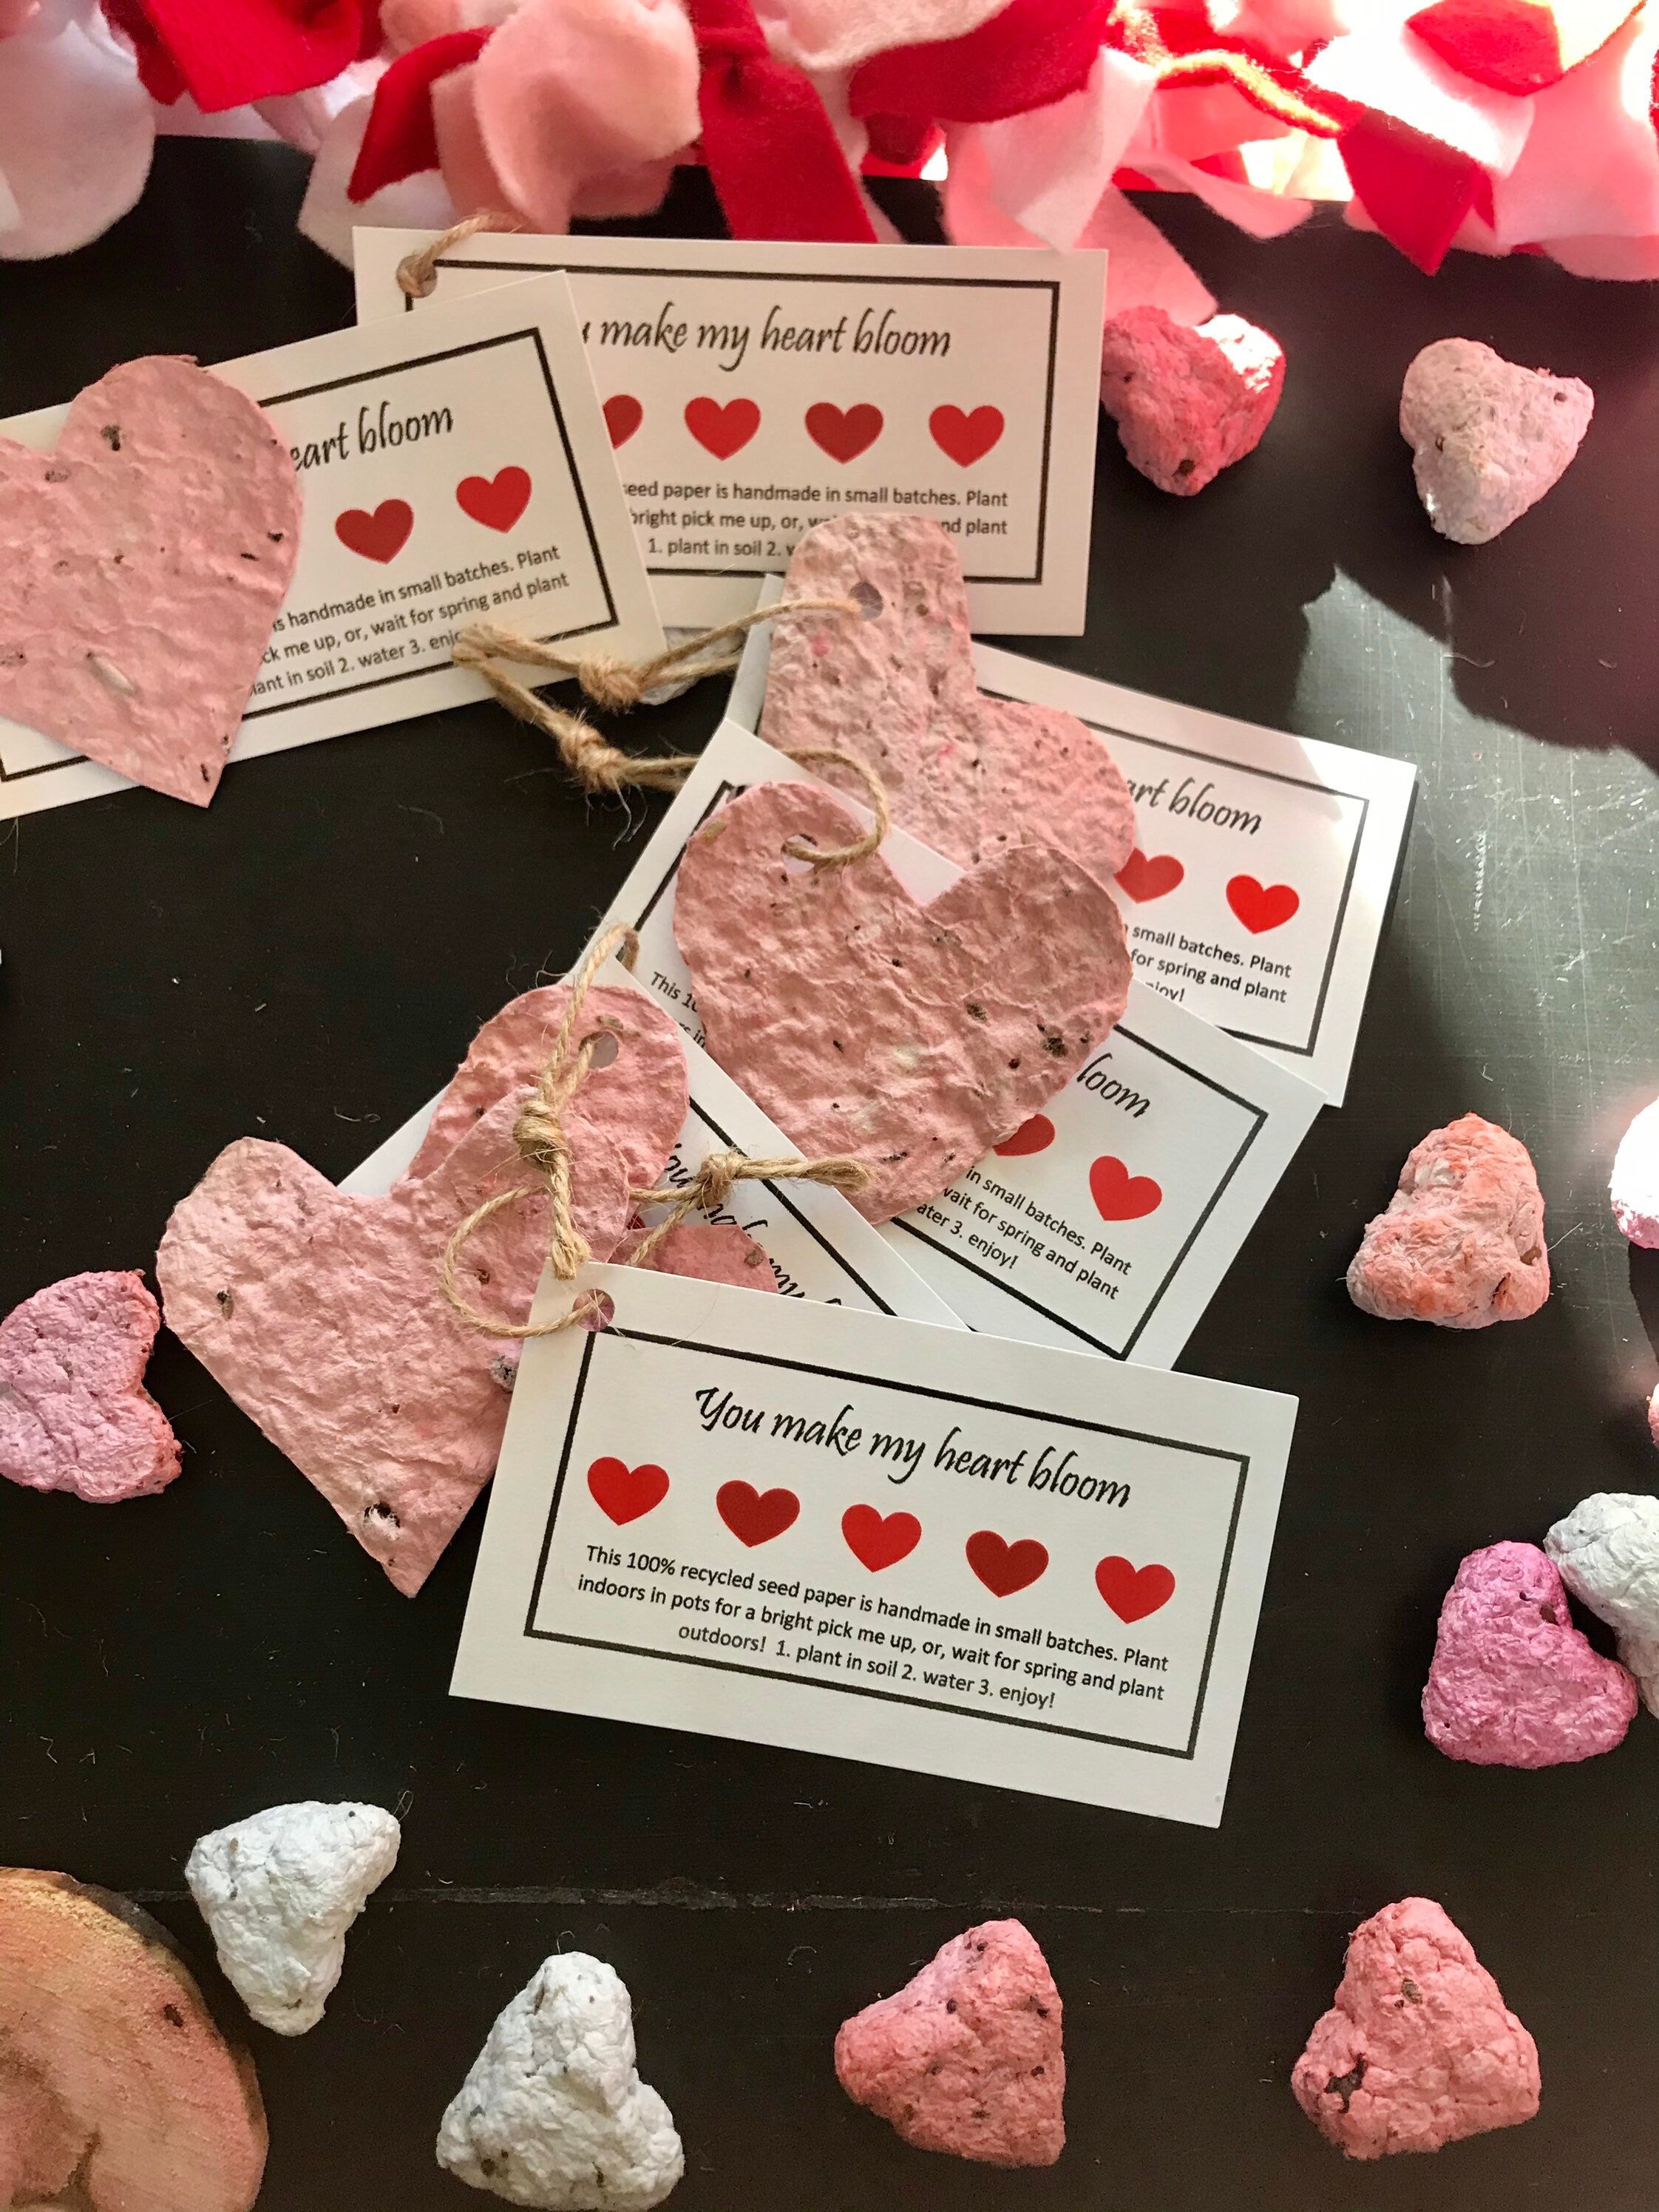 HOW TO MAKE SEED PAPER HEARTS - Saved from Salvage